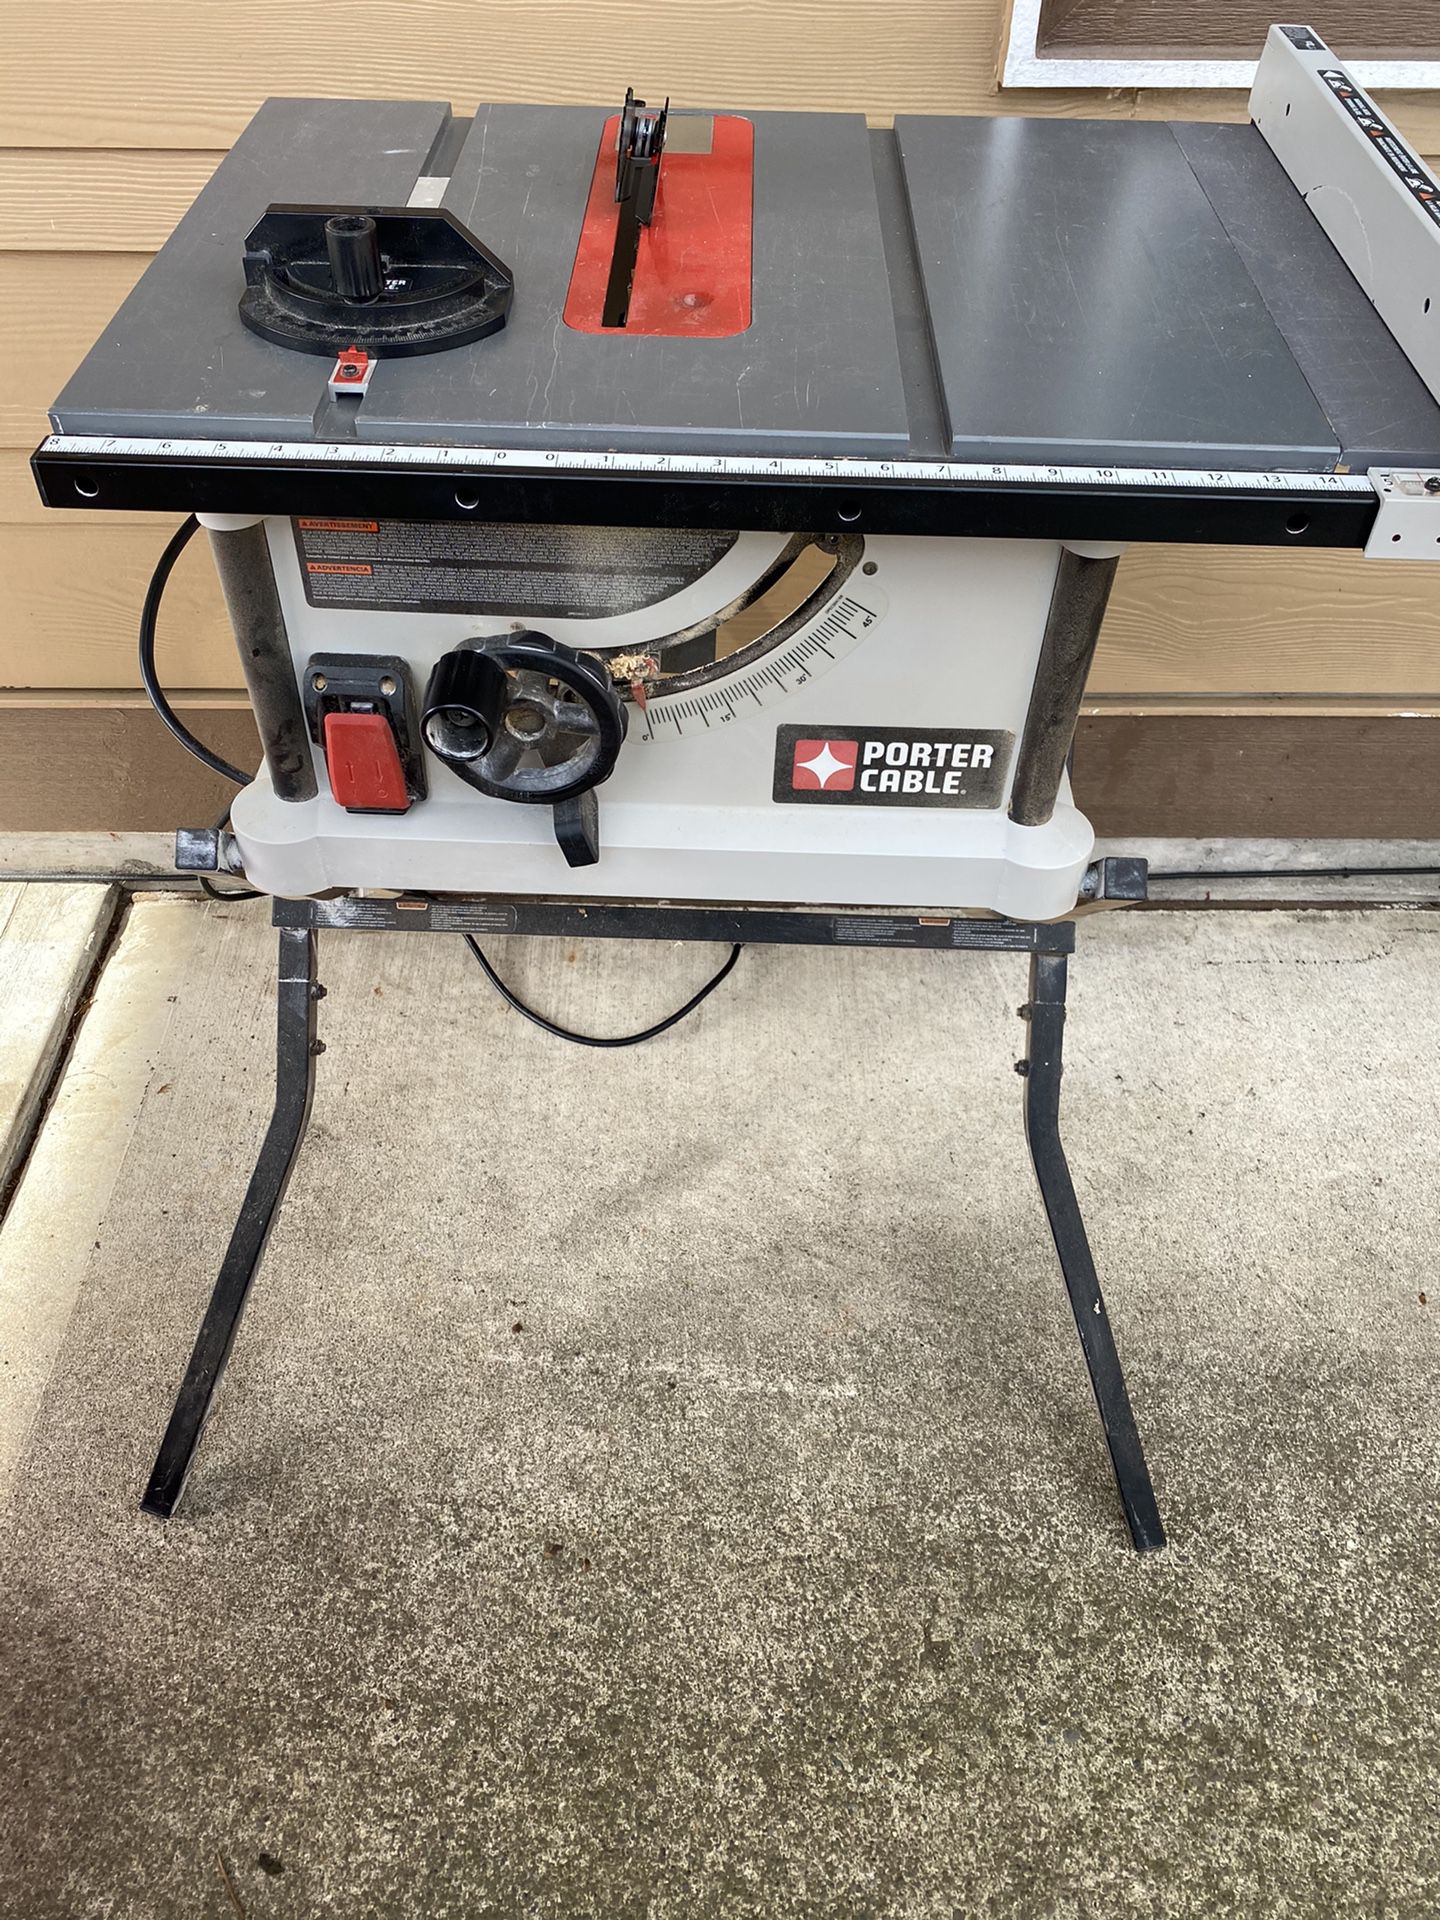 Porter cable 10” portable table saw